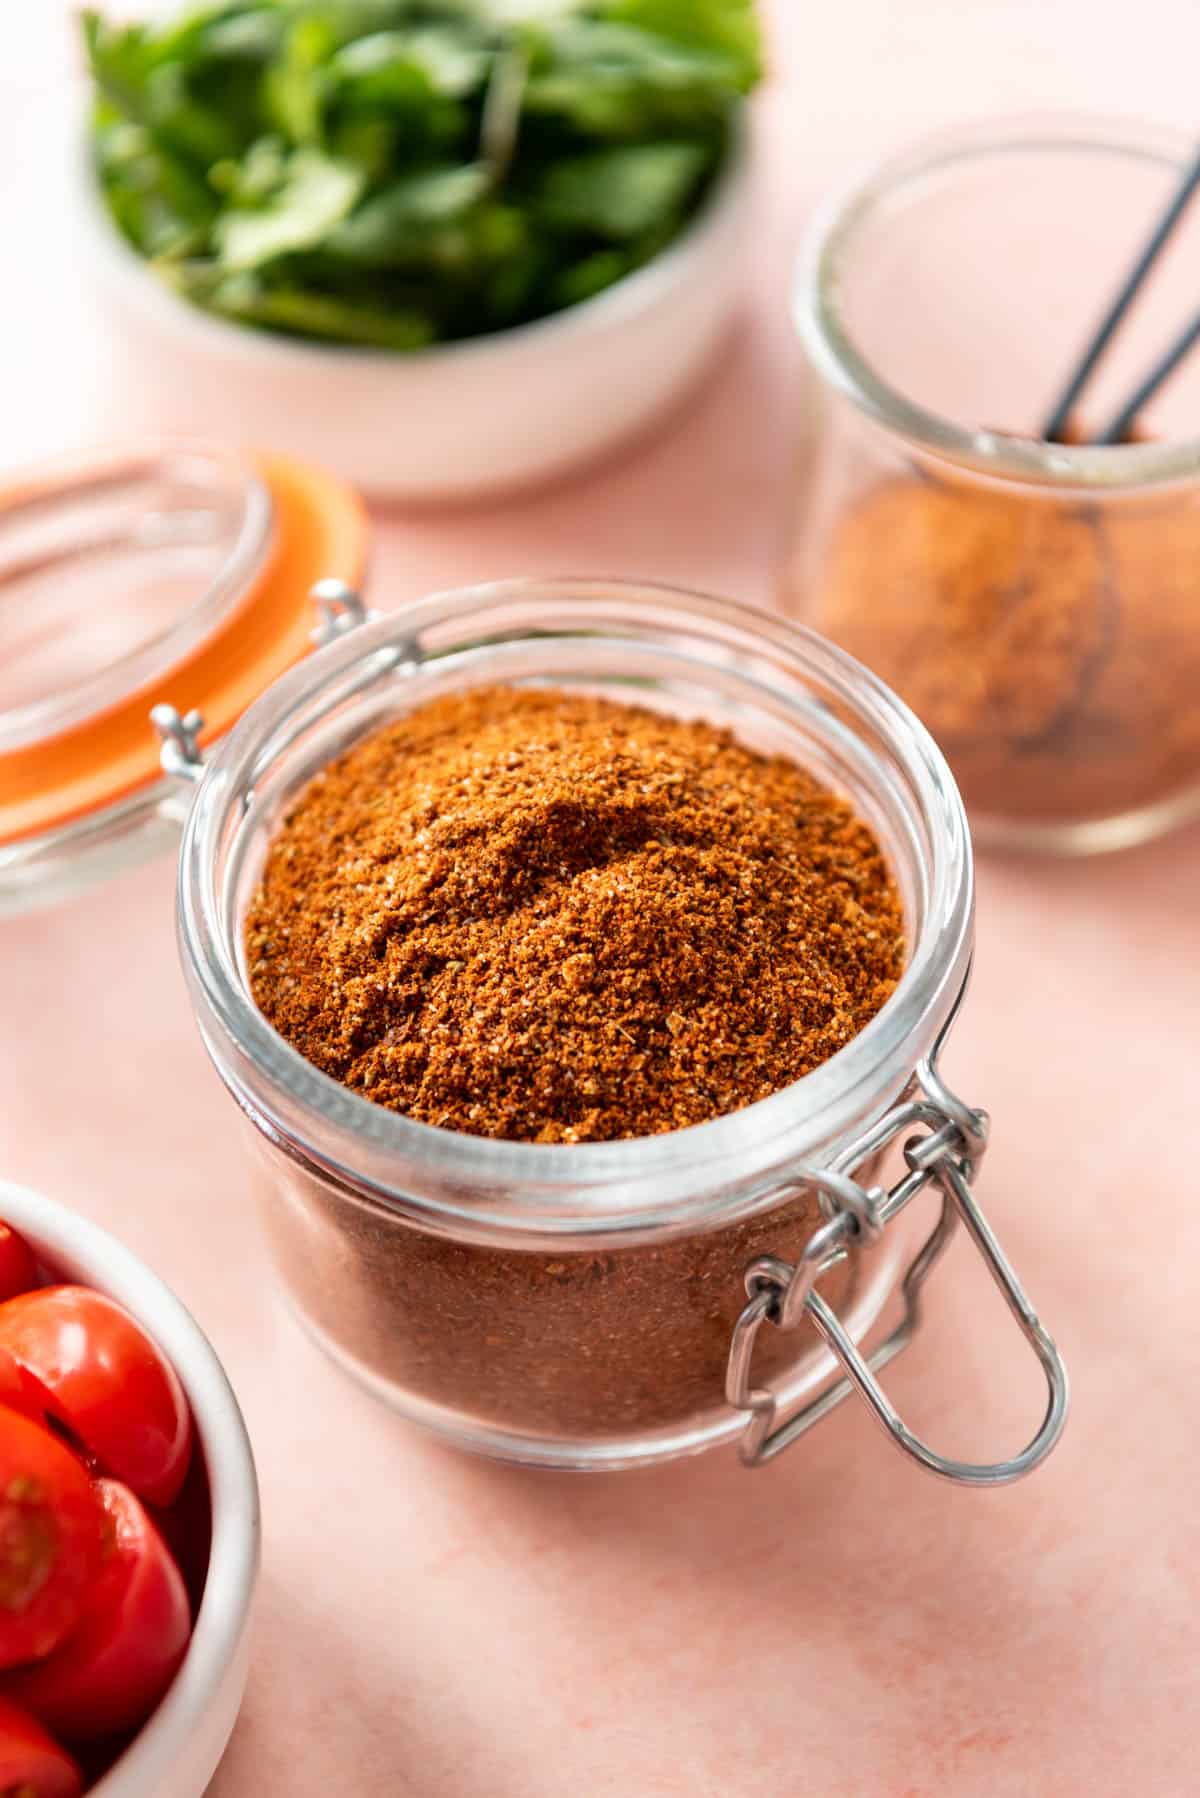 A glass jar with a lid filled with homemade taco seasoning.